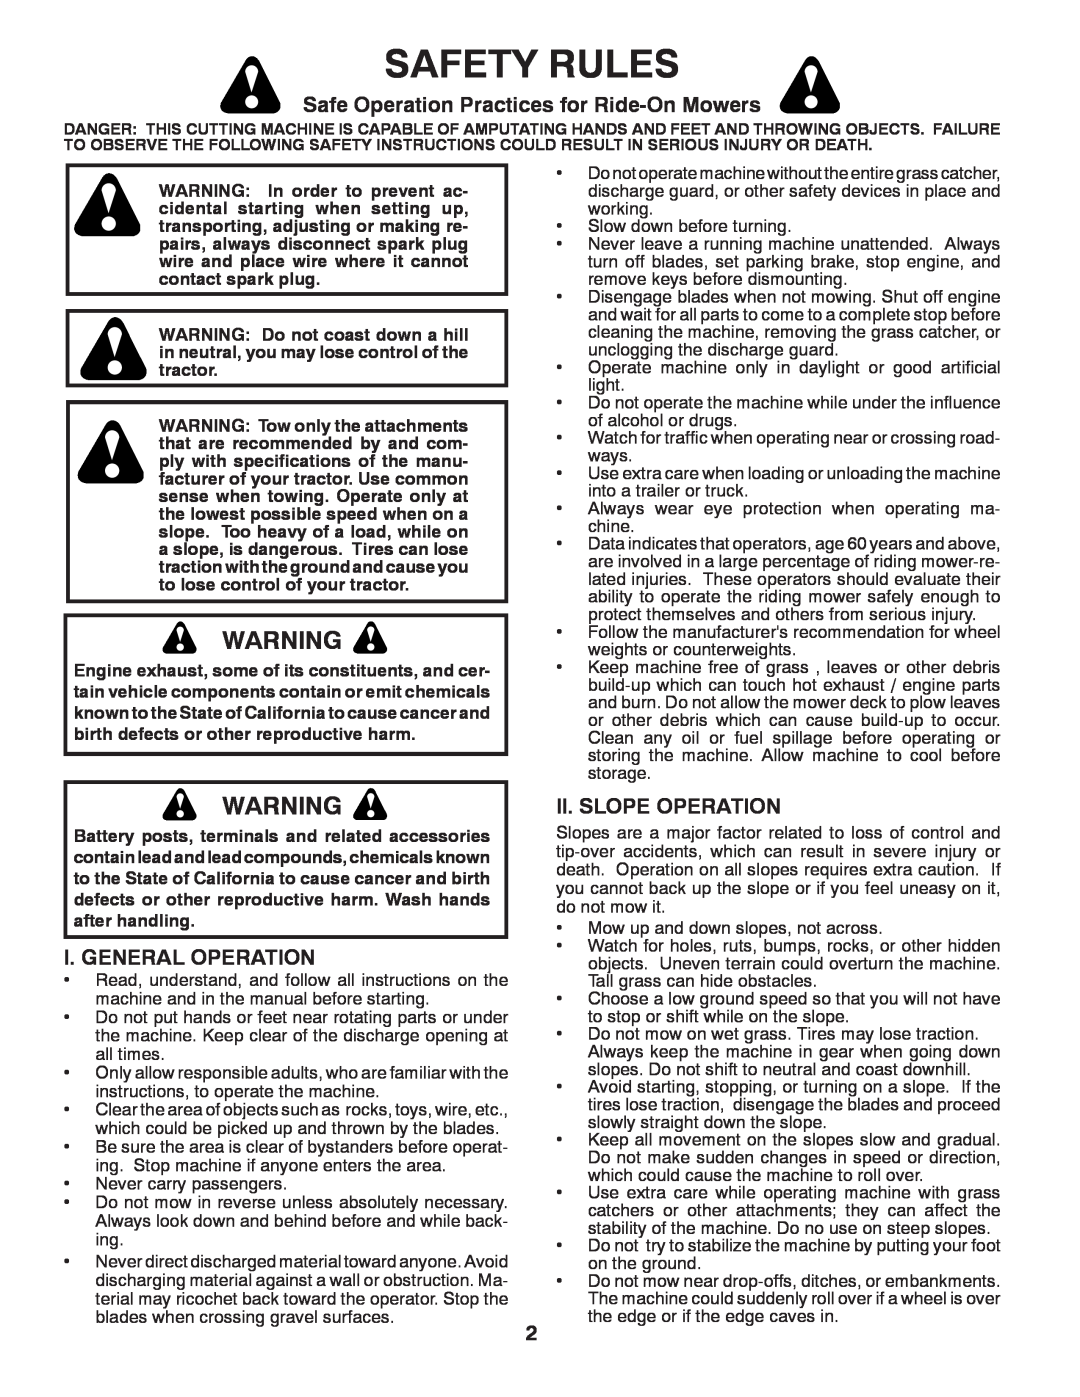 Husqvarna YTH2454 Safety Rules, Safe Operation Practices for Ride-OnMowers, I. General Operation, Ii. Slope Operation 